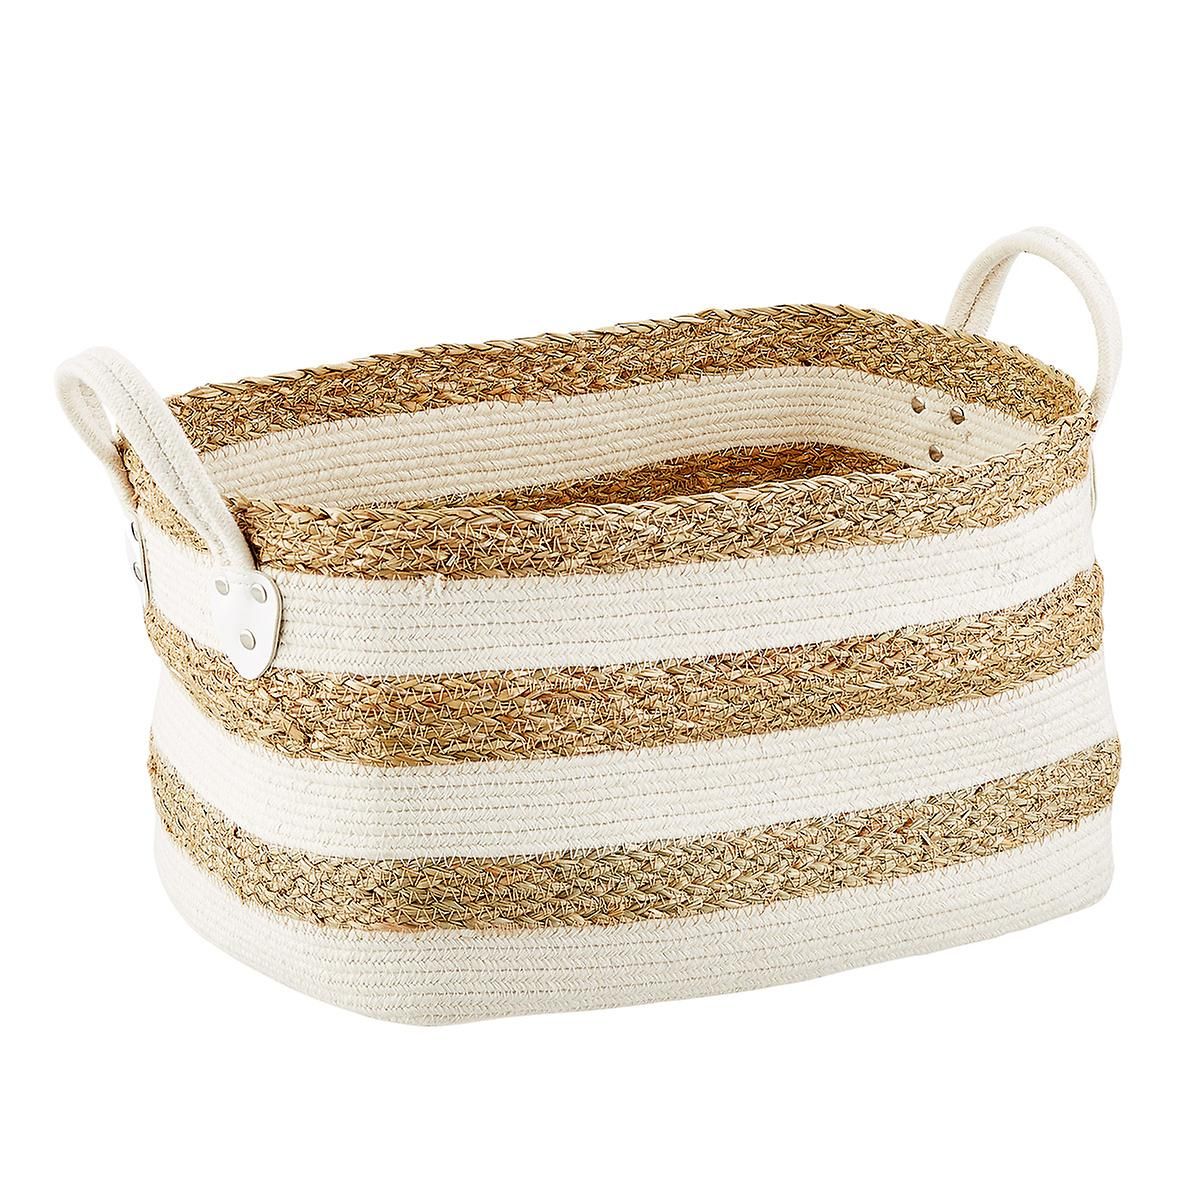 Large Seagrass & Cotton Basket White/Natural | The Container Store